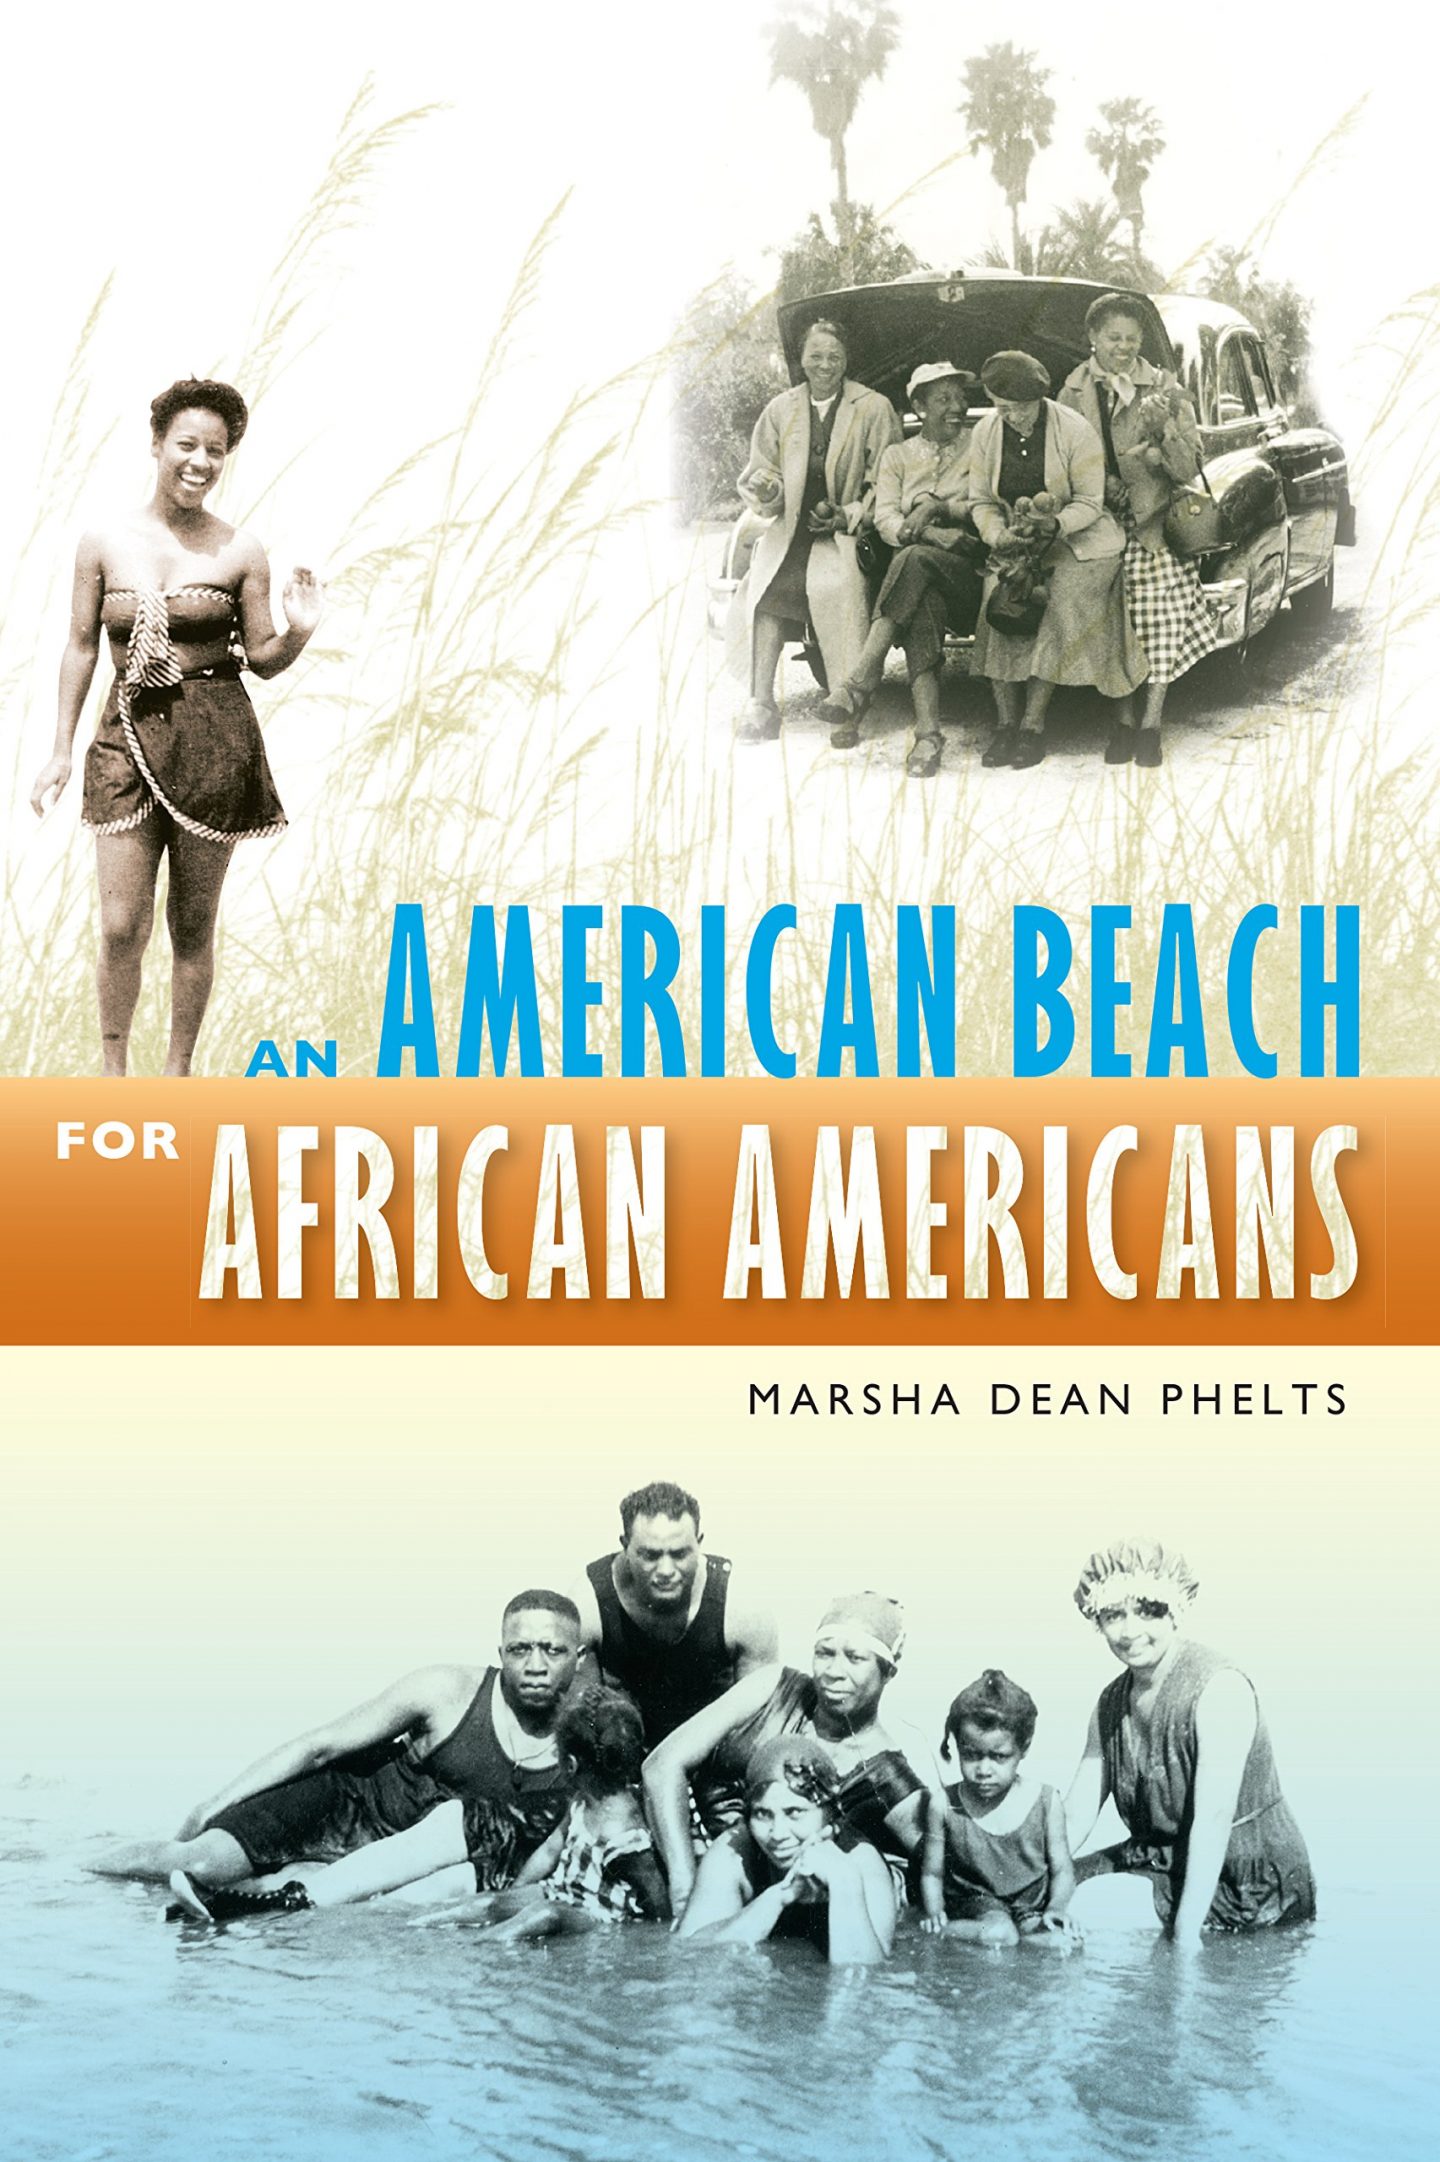 Black Beach Heritage Books: American Beach, Florida - A group of people wearing costumes - Russ Rymer